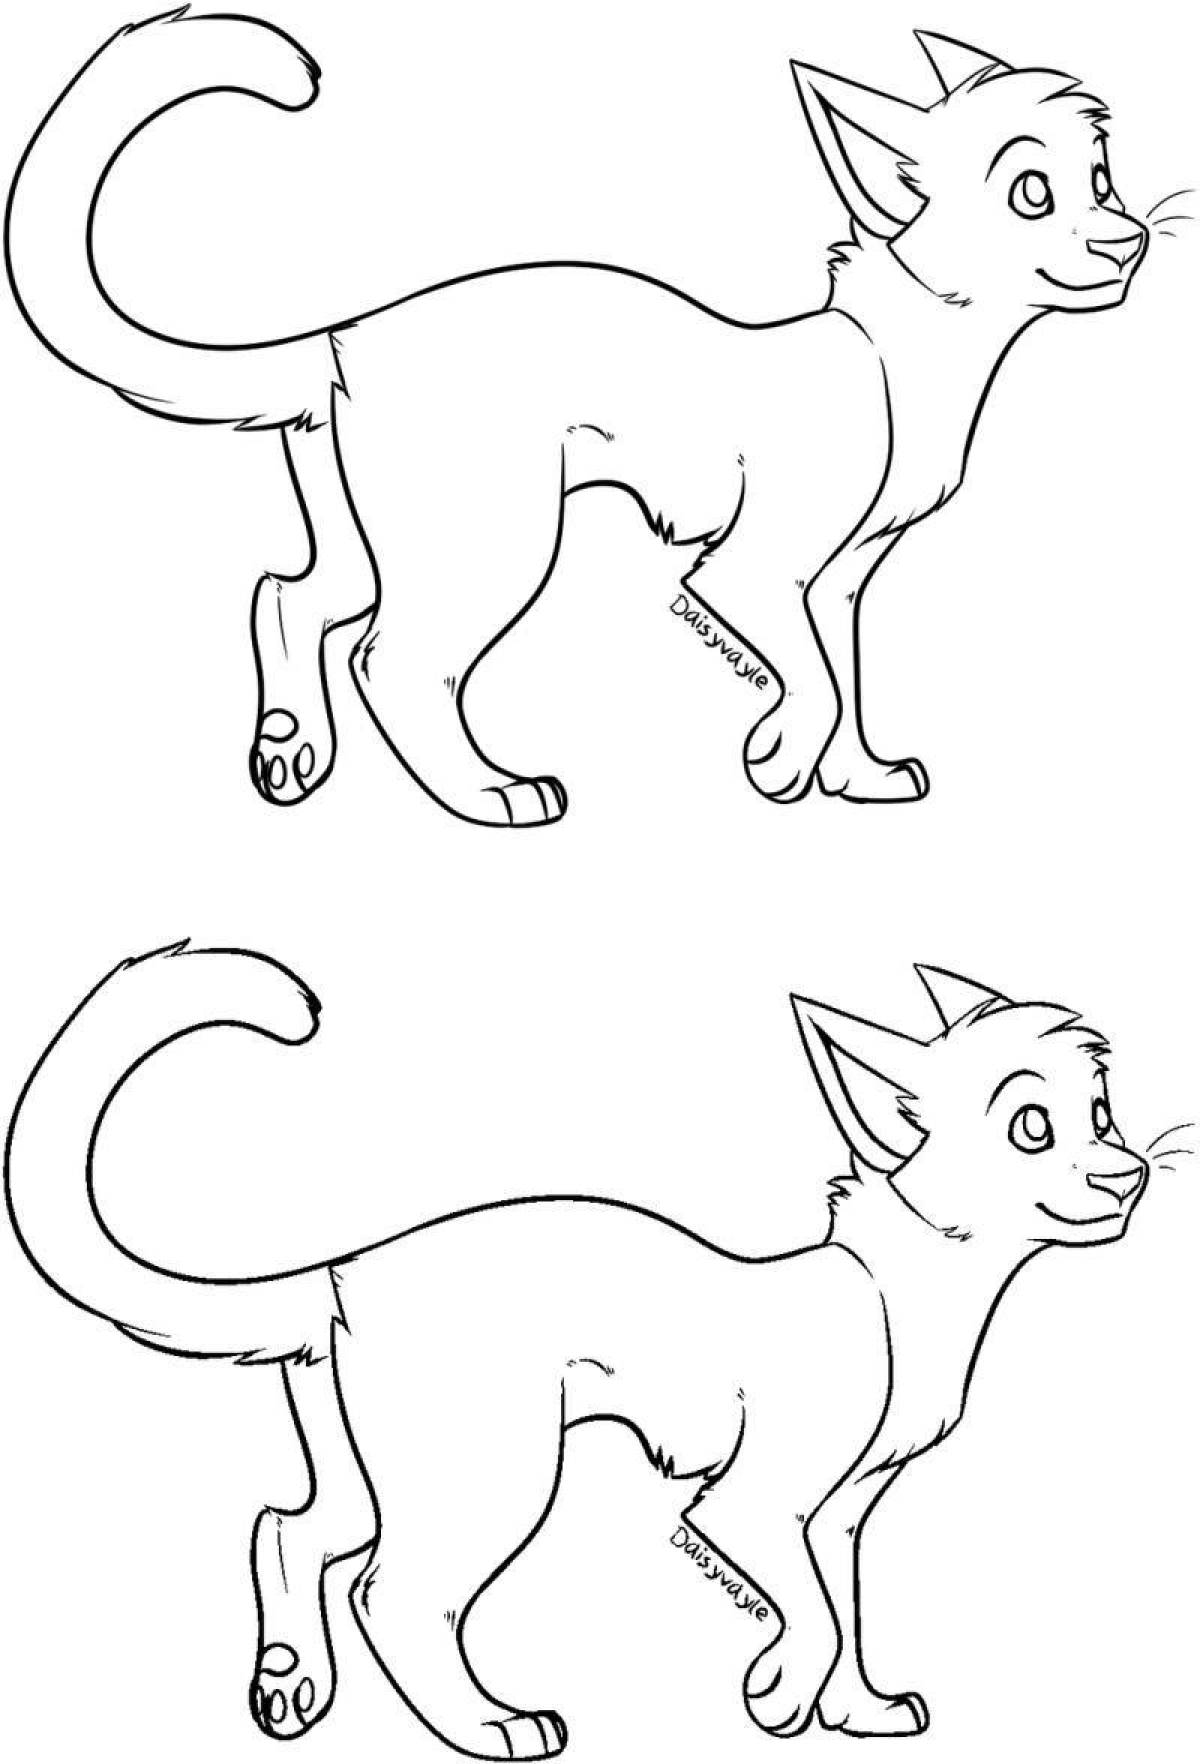 Coloring book dazzling warrior cats